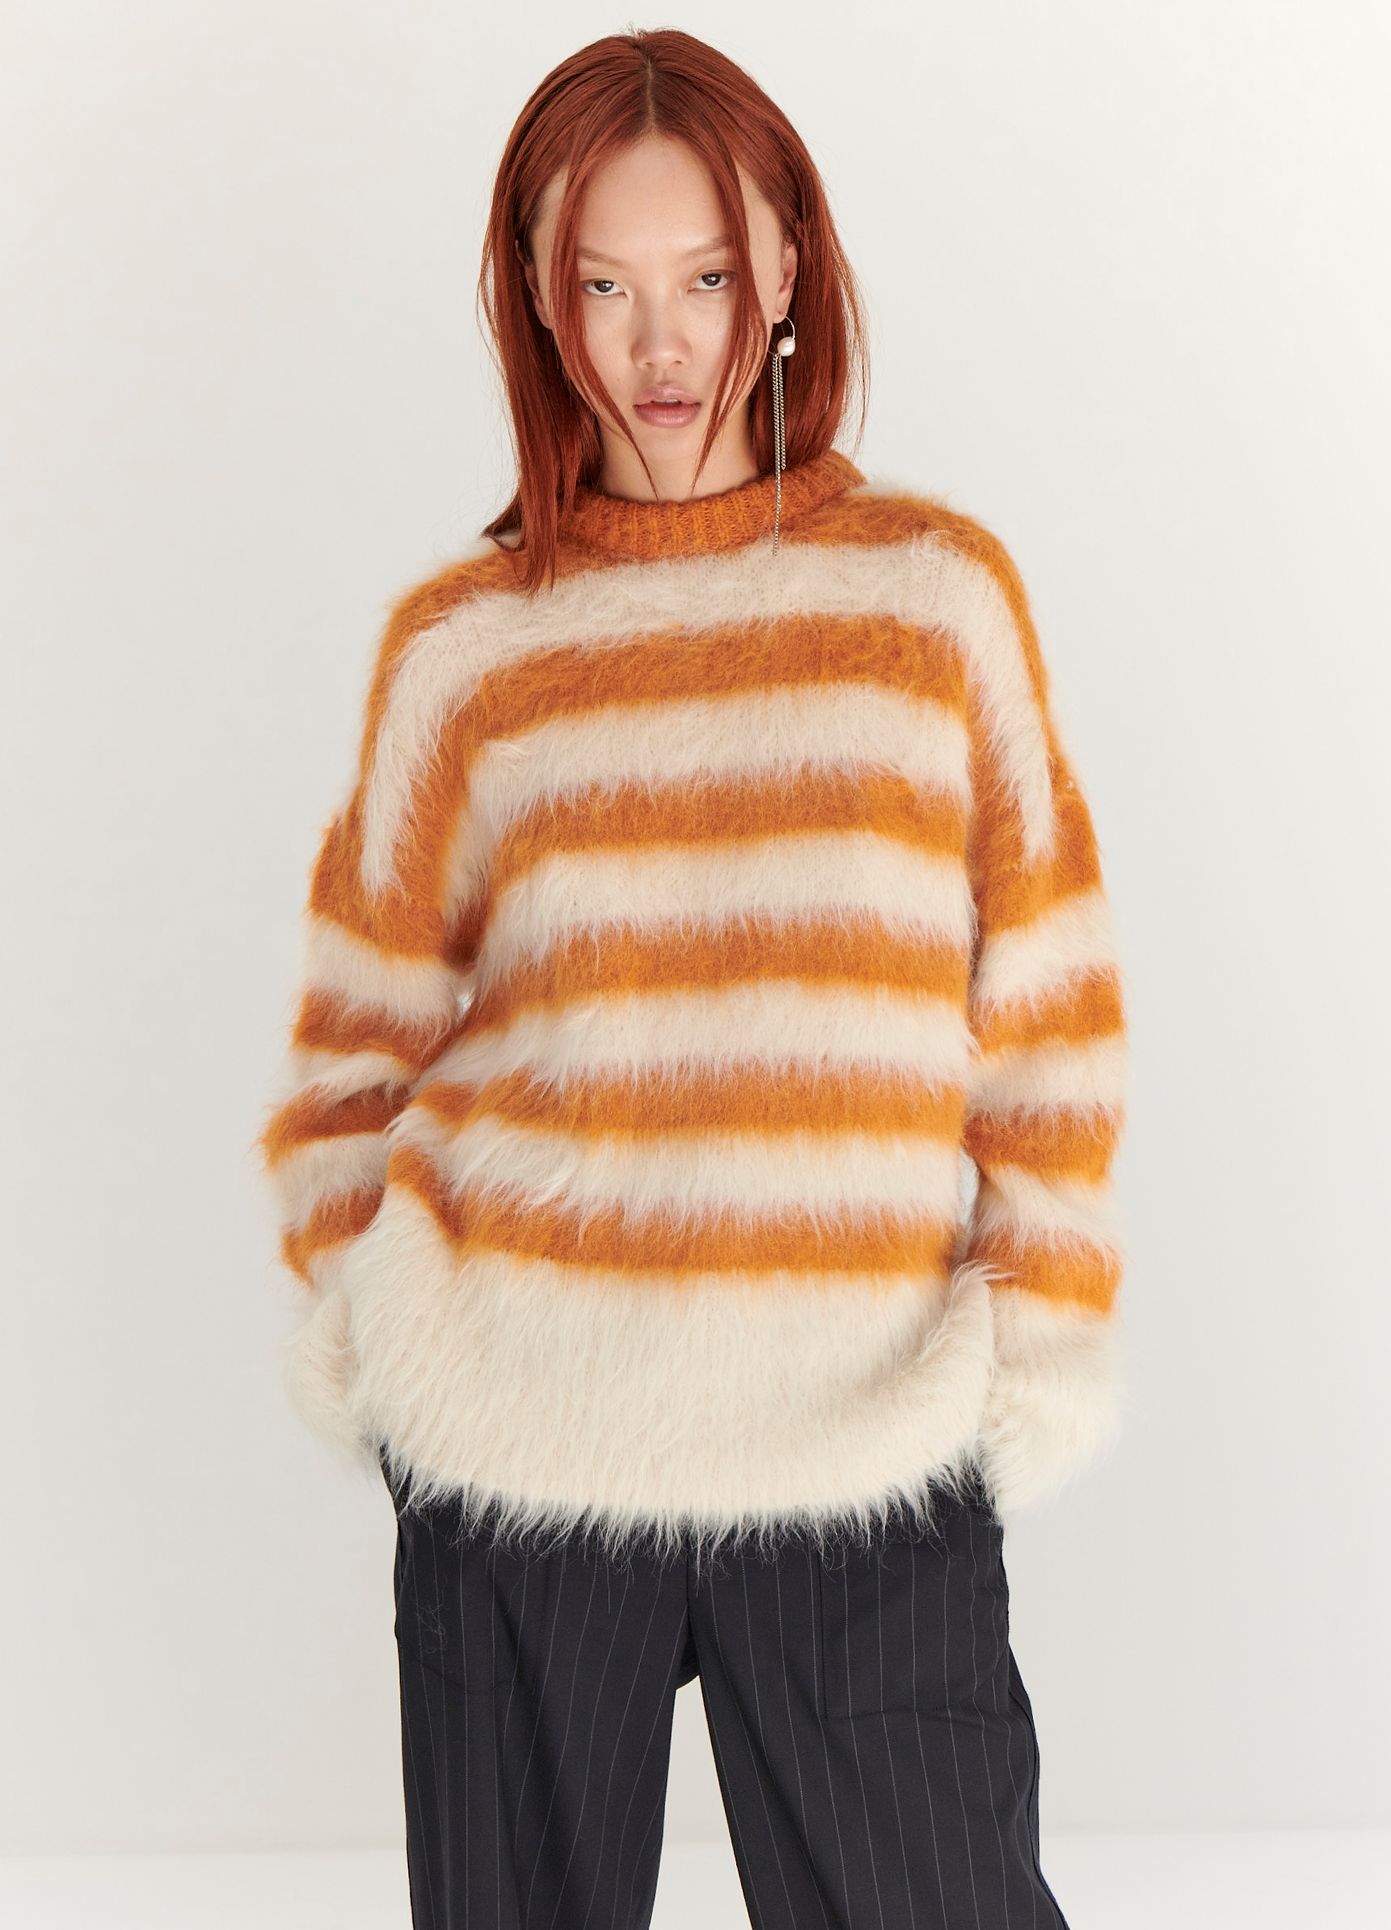 MONSE Striped Alpaca Sweater in White and Orange on model front view